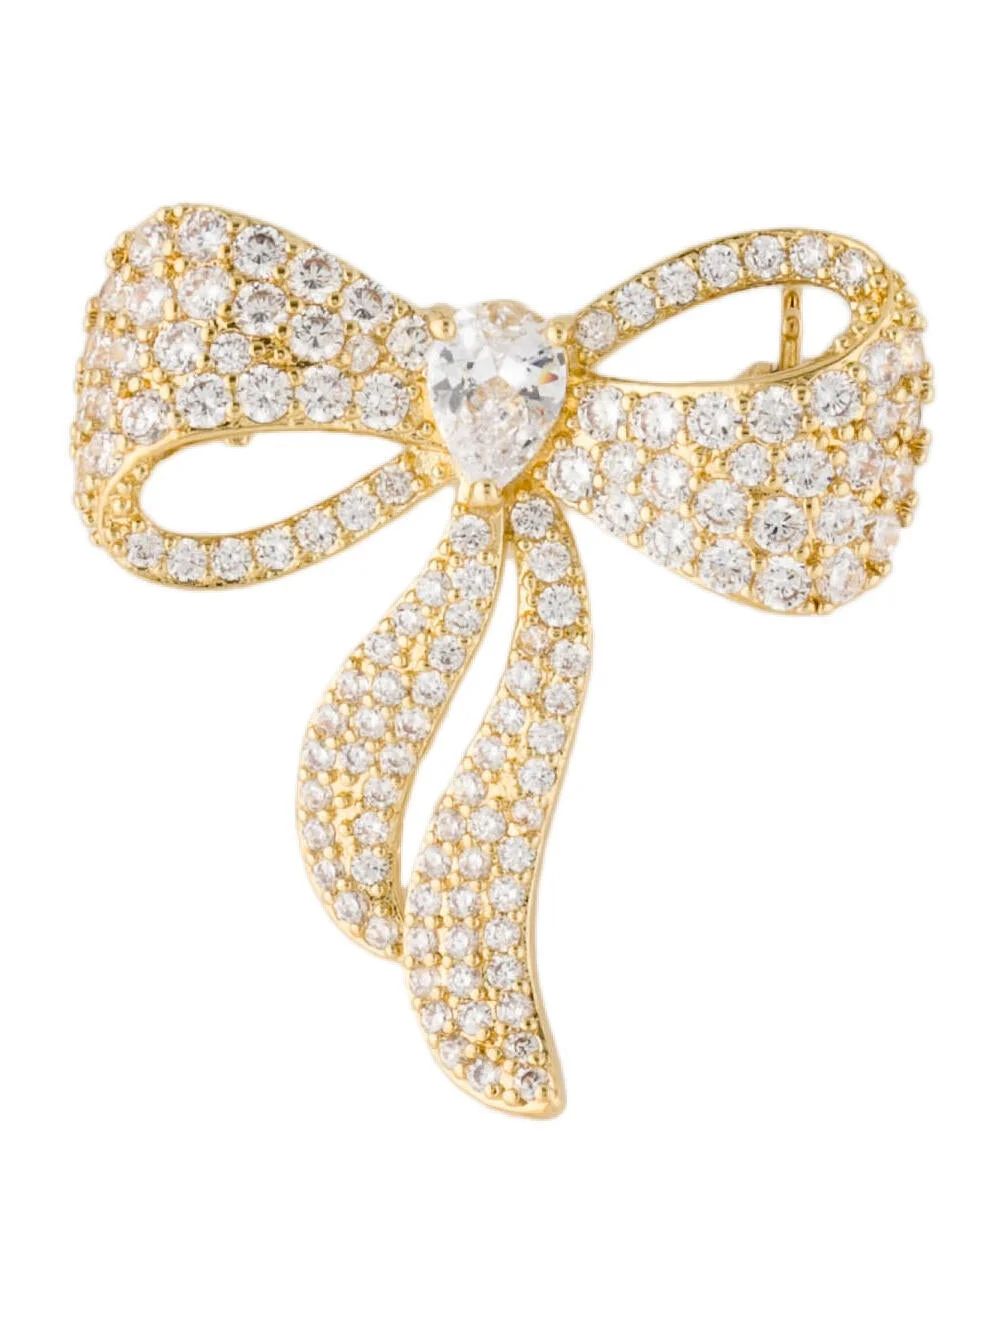 Cubic Zirconia Bow Brooch | The RealReal